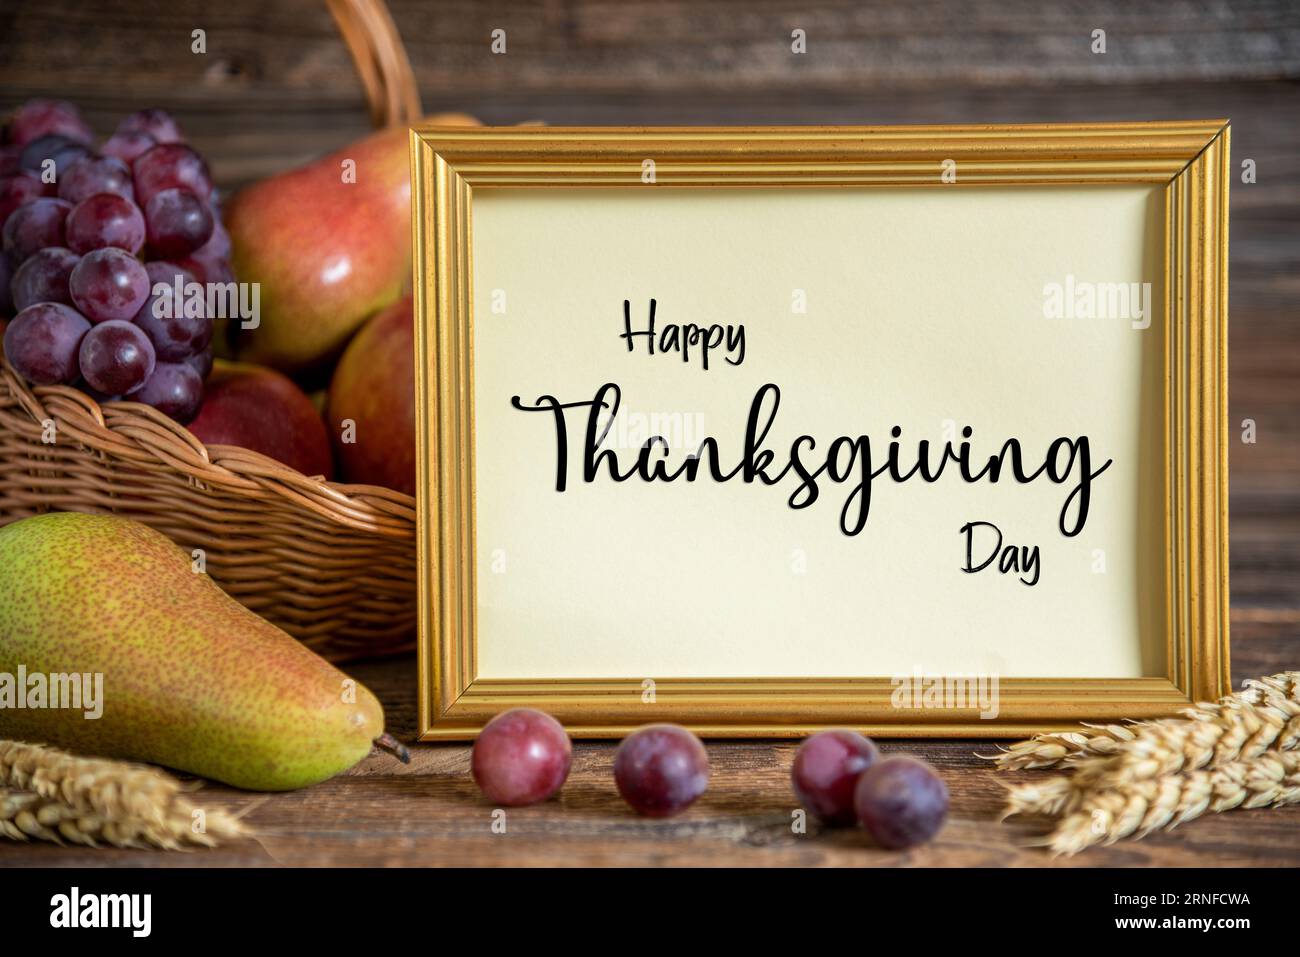 Fall Decoration with Pears, Apples and Grapes, Thanksgiving Background, Autumn Season and Text Happy Thanksgiving Day Stock Photo